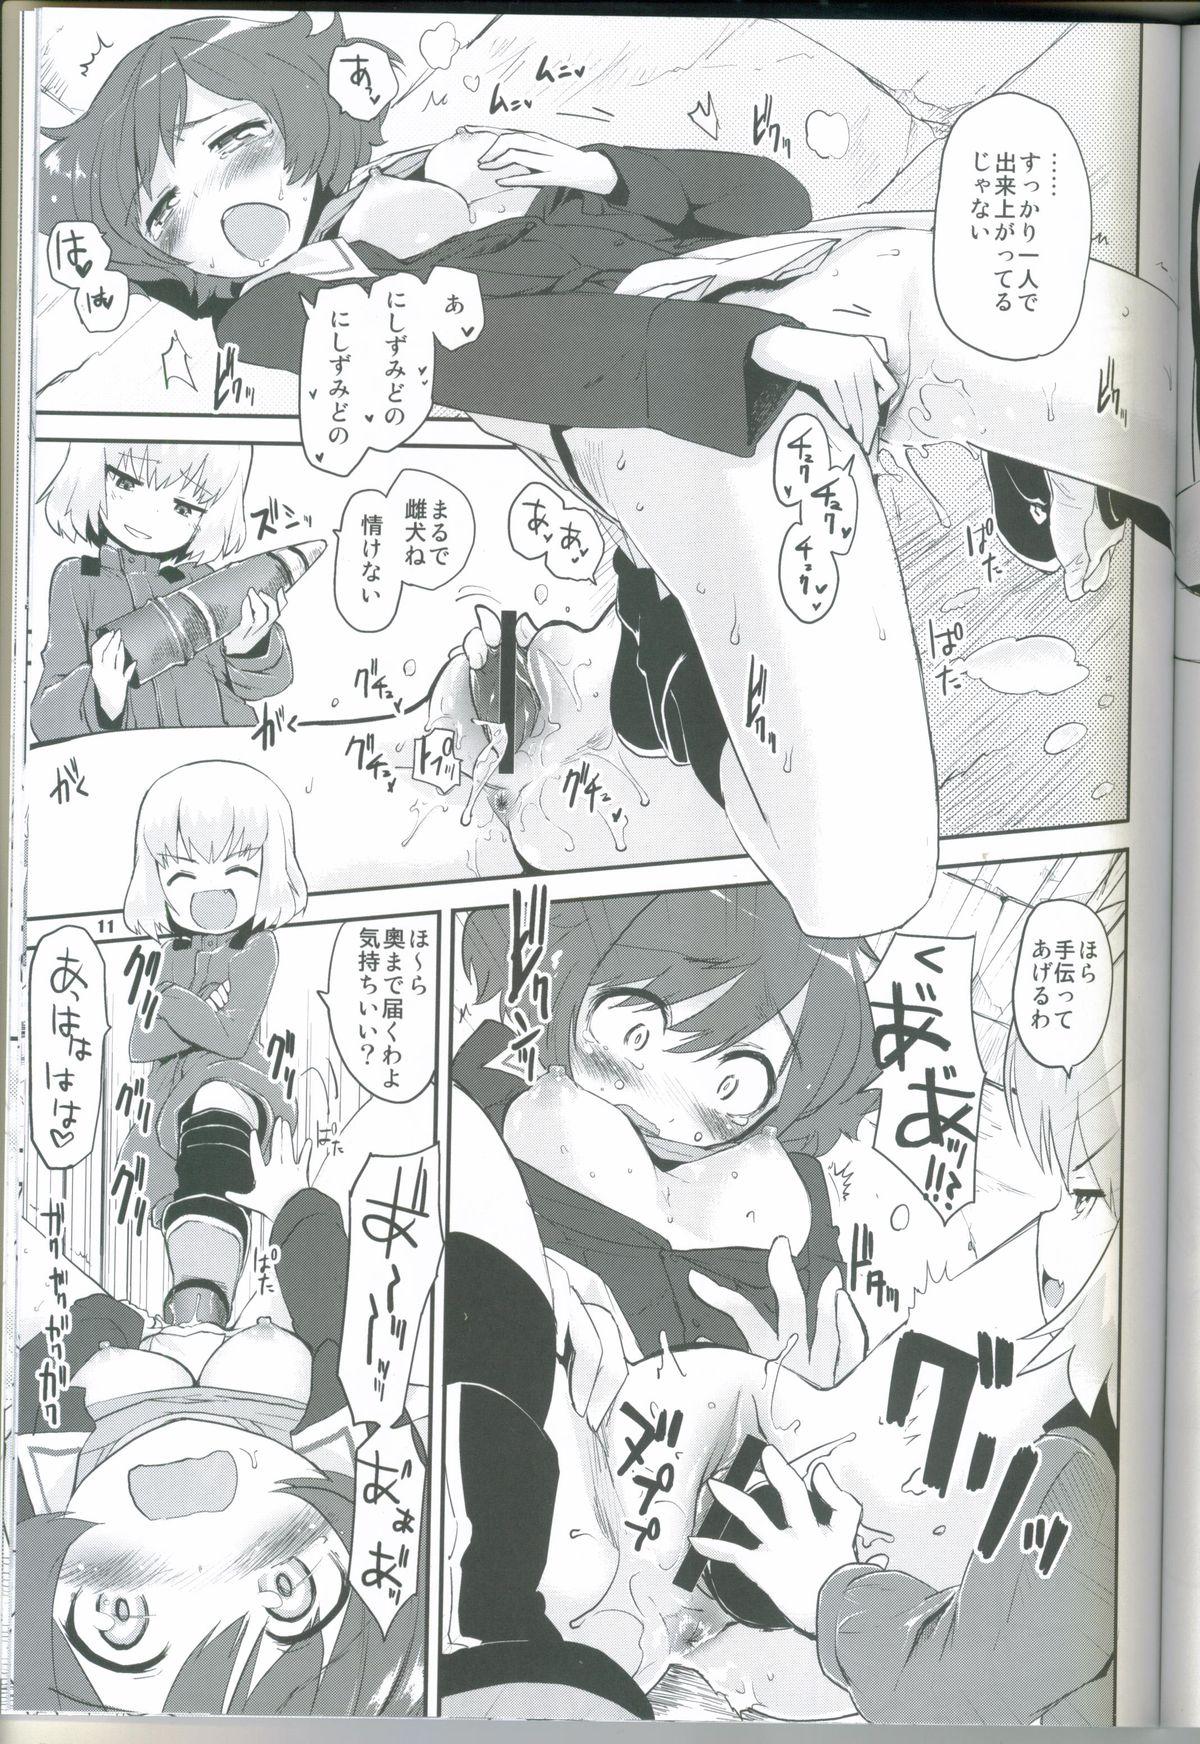 Animated The General Frost Has Come! - Girls und panzer Butthole - Page 10